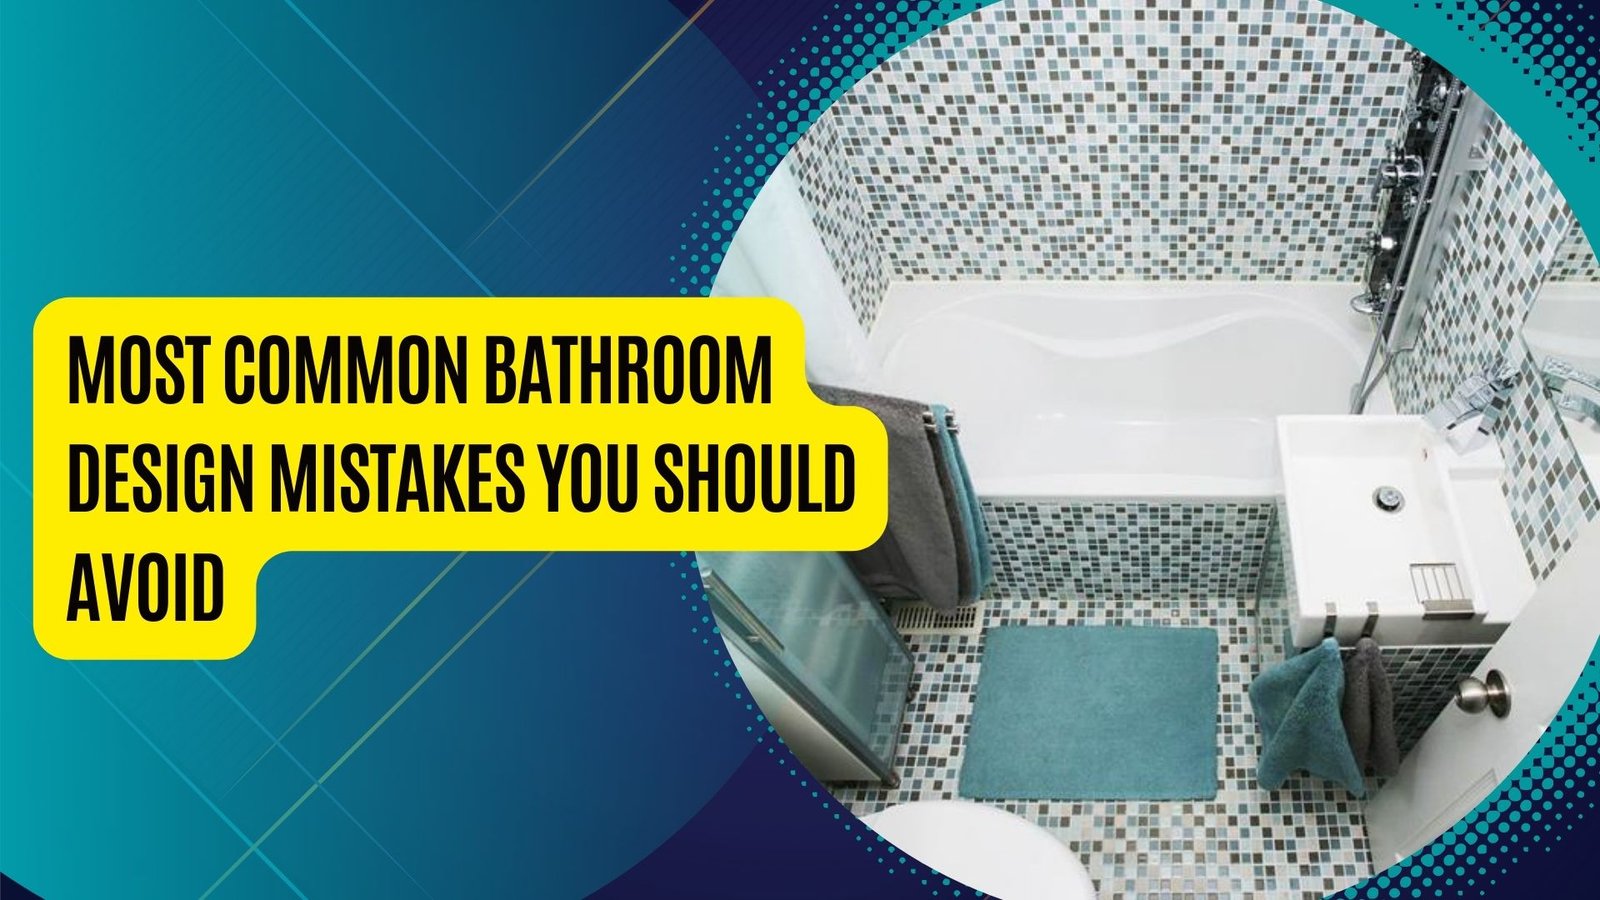 Most Common Bathroom Design Mistakes You Should Avoid